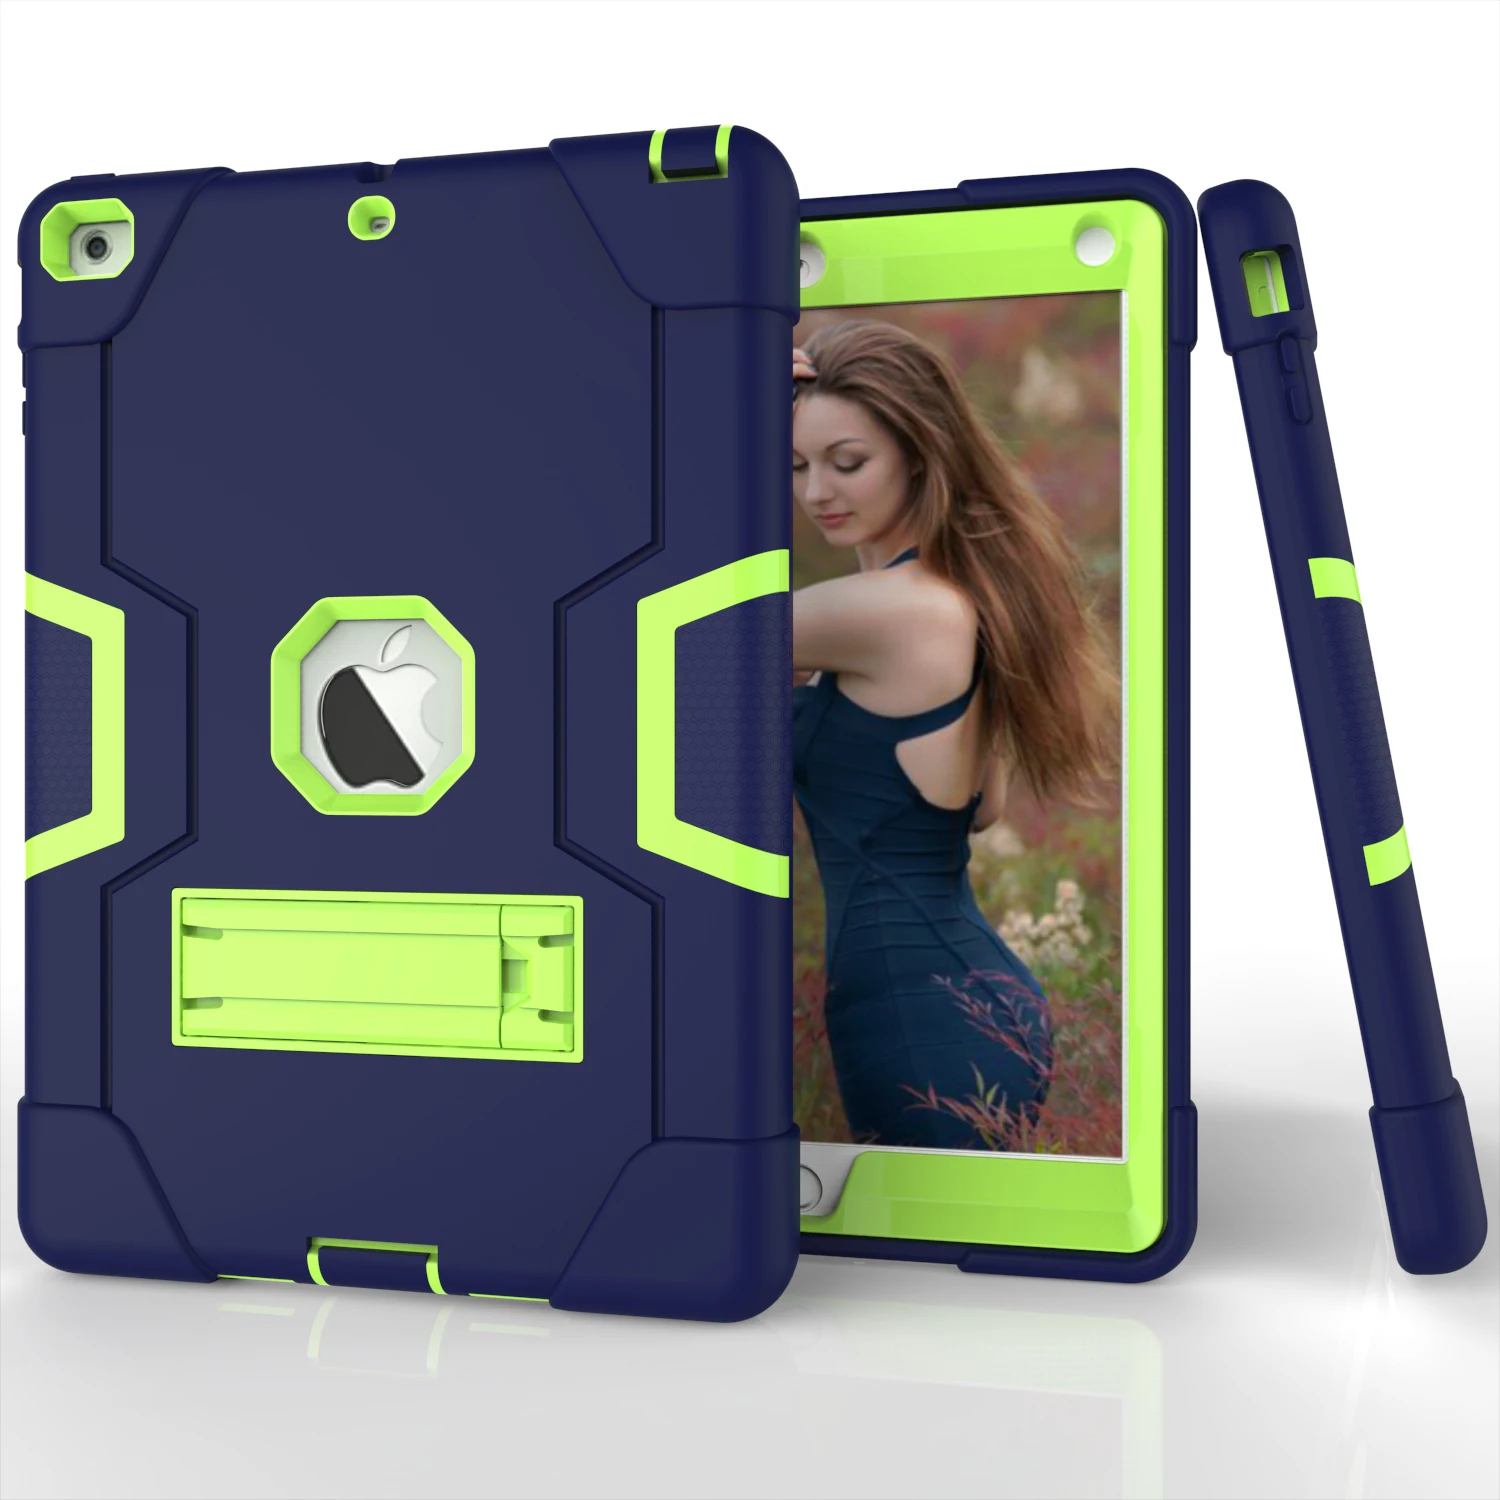 Armor Case For iPad 4 3 2 9.7 Heavy Duty Silicone TPU+ PC Hard Stand Drop Shock Proof+ Screen Protector IP71